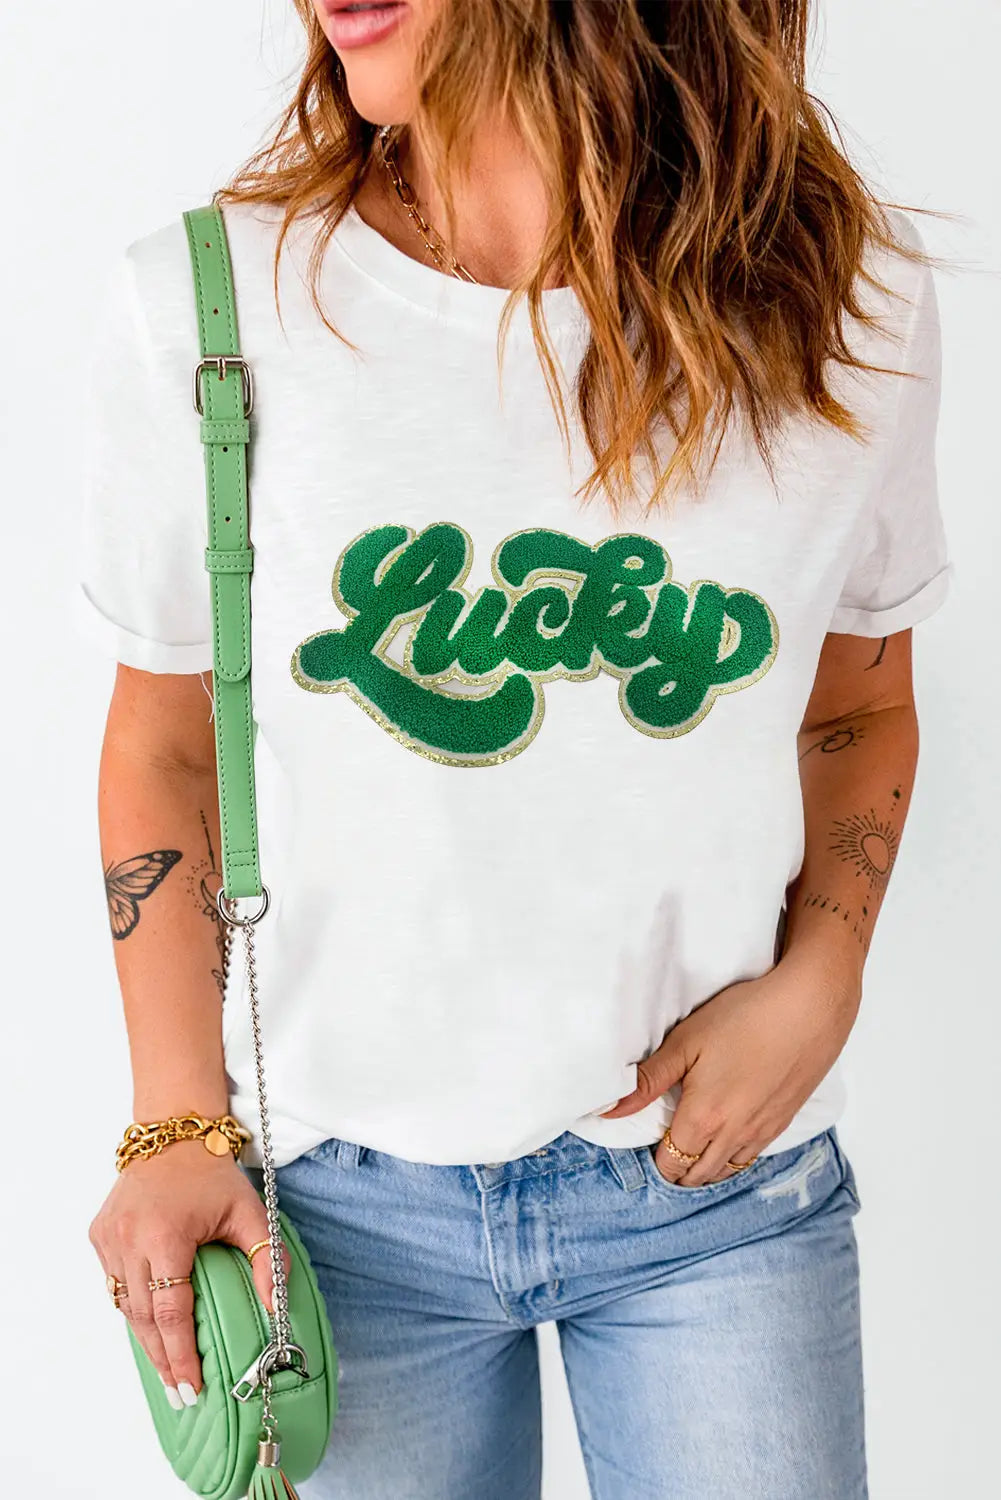 White st. Patrick lucky chenille glitter patched graphic t shirt - s / 62% polyester + 32% cotton + 6% elastane